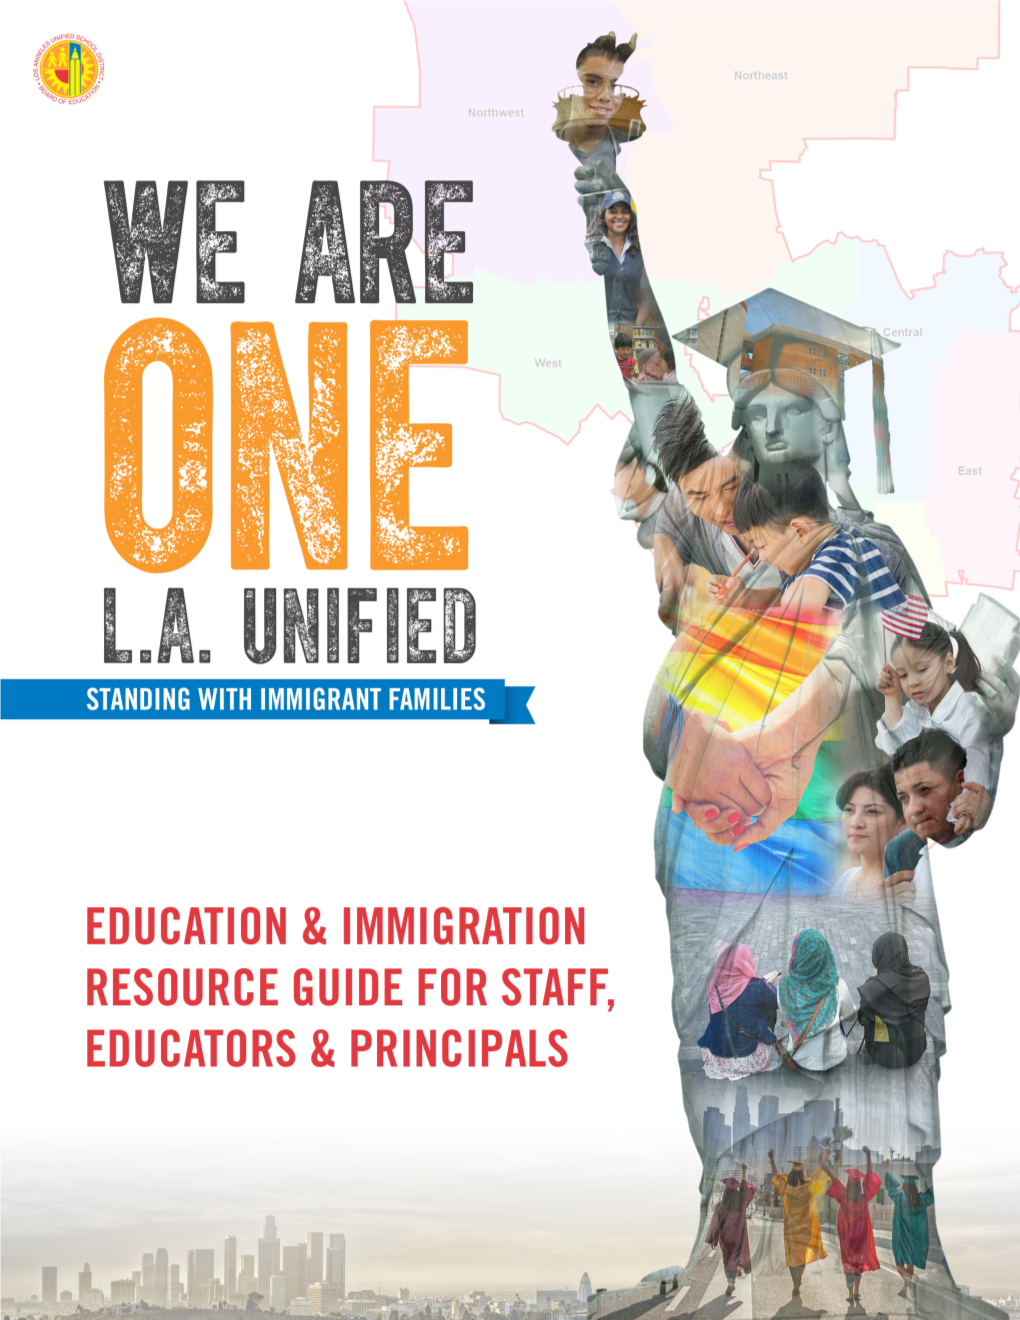 Centers for Education and Immigration Resources